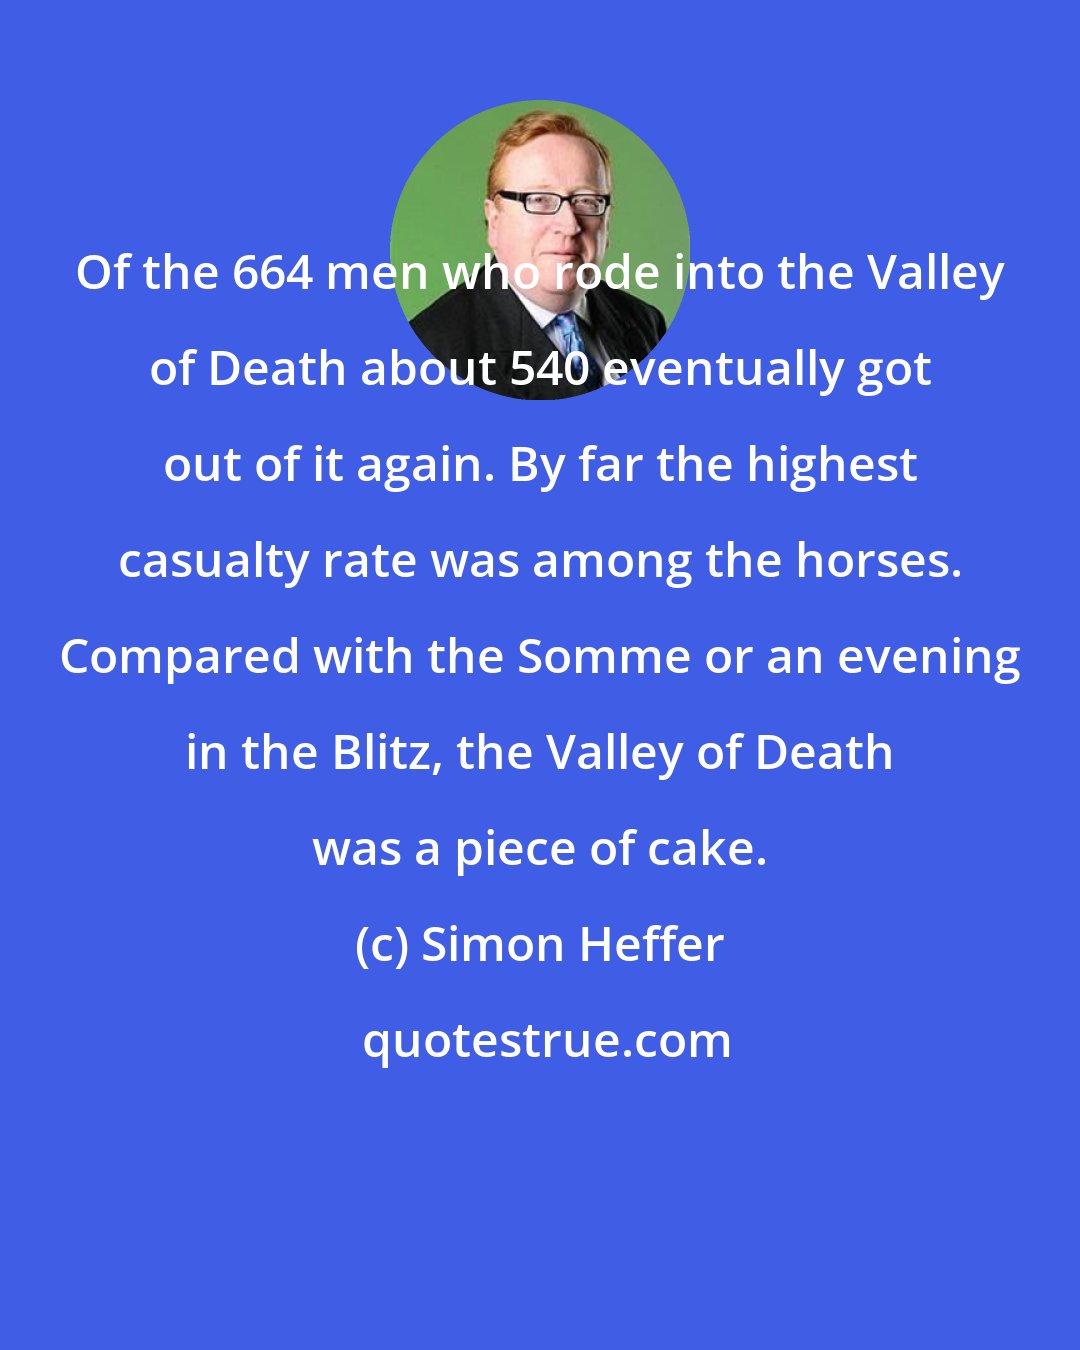 Simon Heffer: Of the 664 men who rode into the Valley of Death about 540 eventually got out of it again. By far the highest casualty rate was among the horses. Compared with the Somme or an evening in the Blitz, the Valley of Death was a piece of cake.